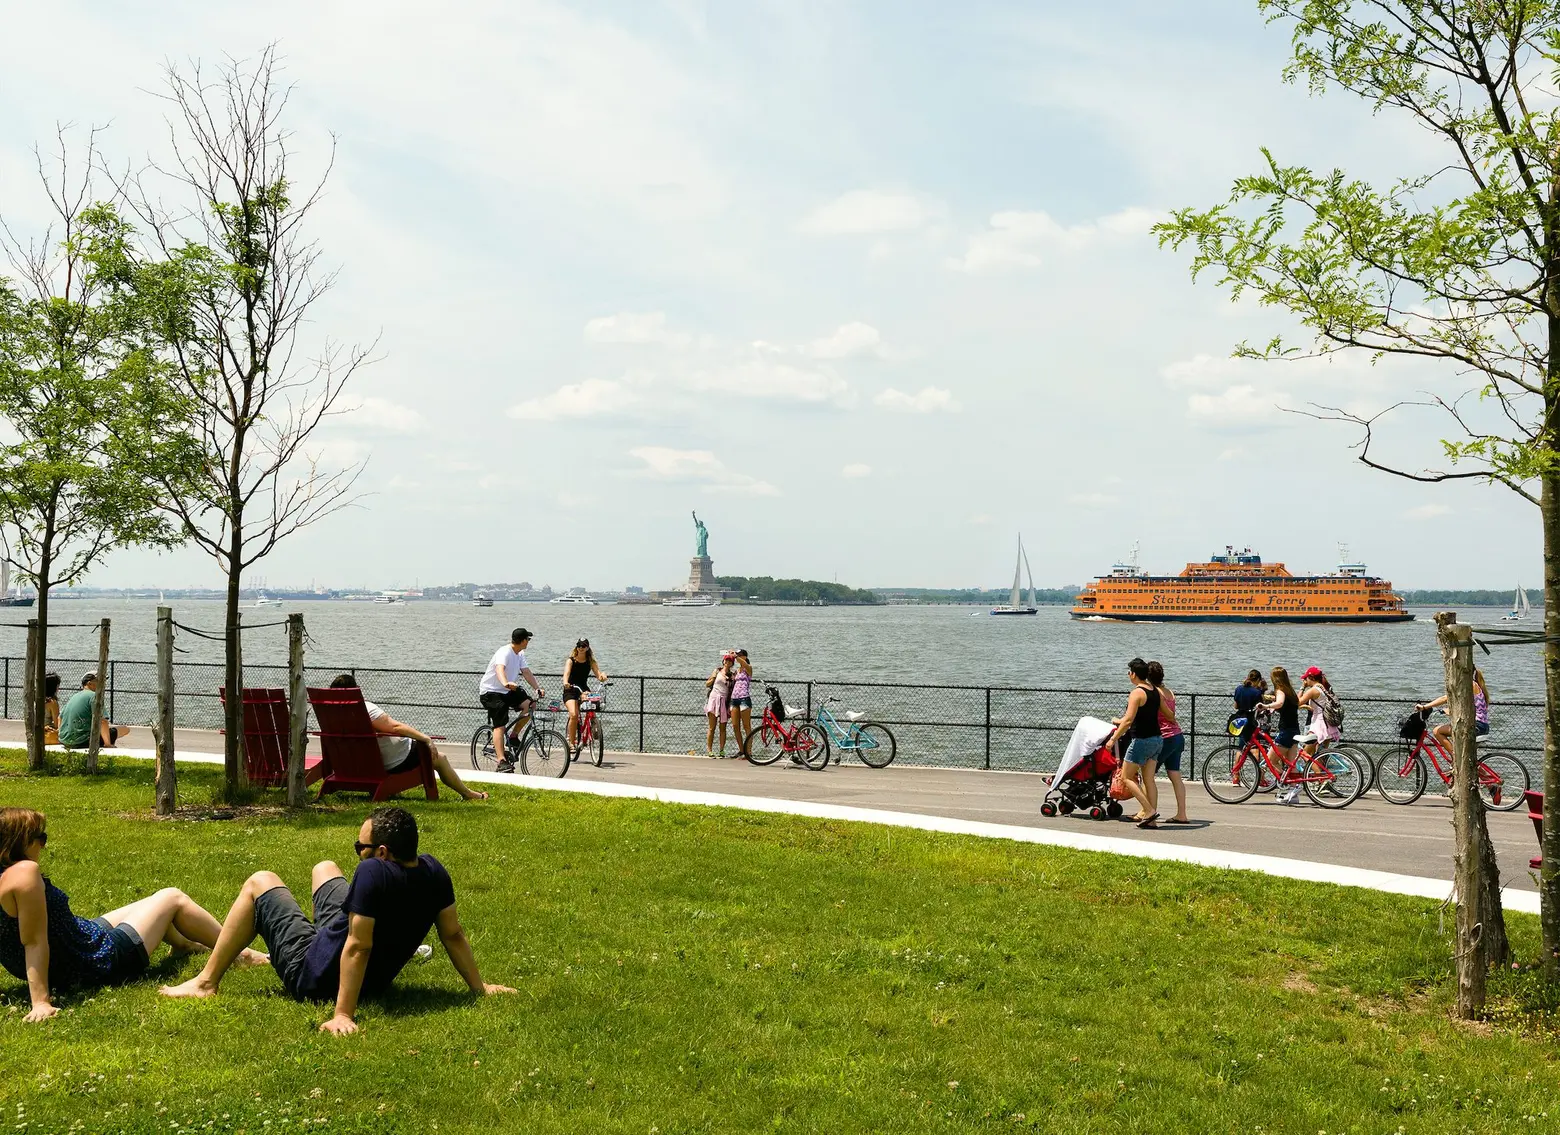 Governors Island will reopen on July 15 with limited capacity